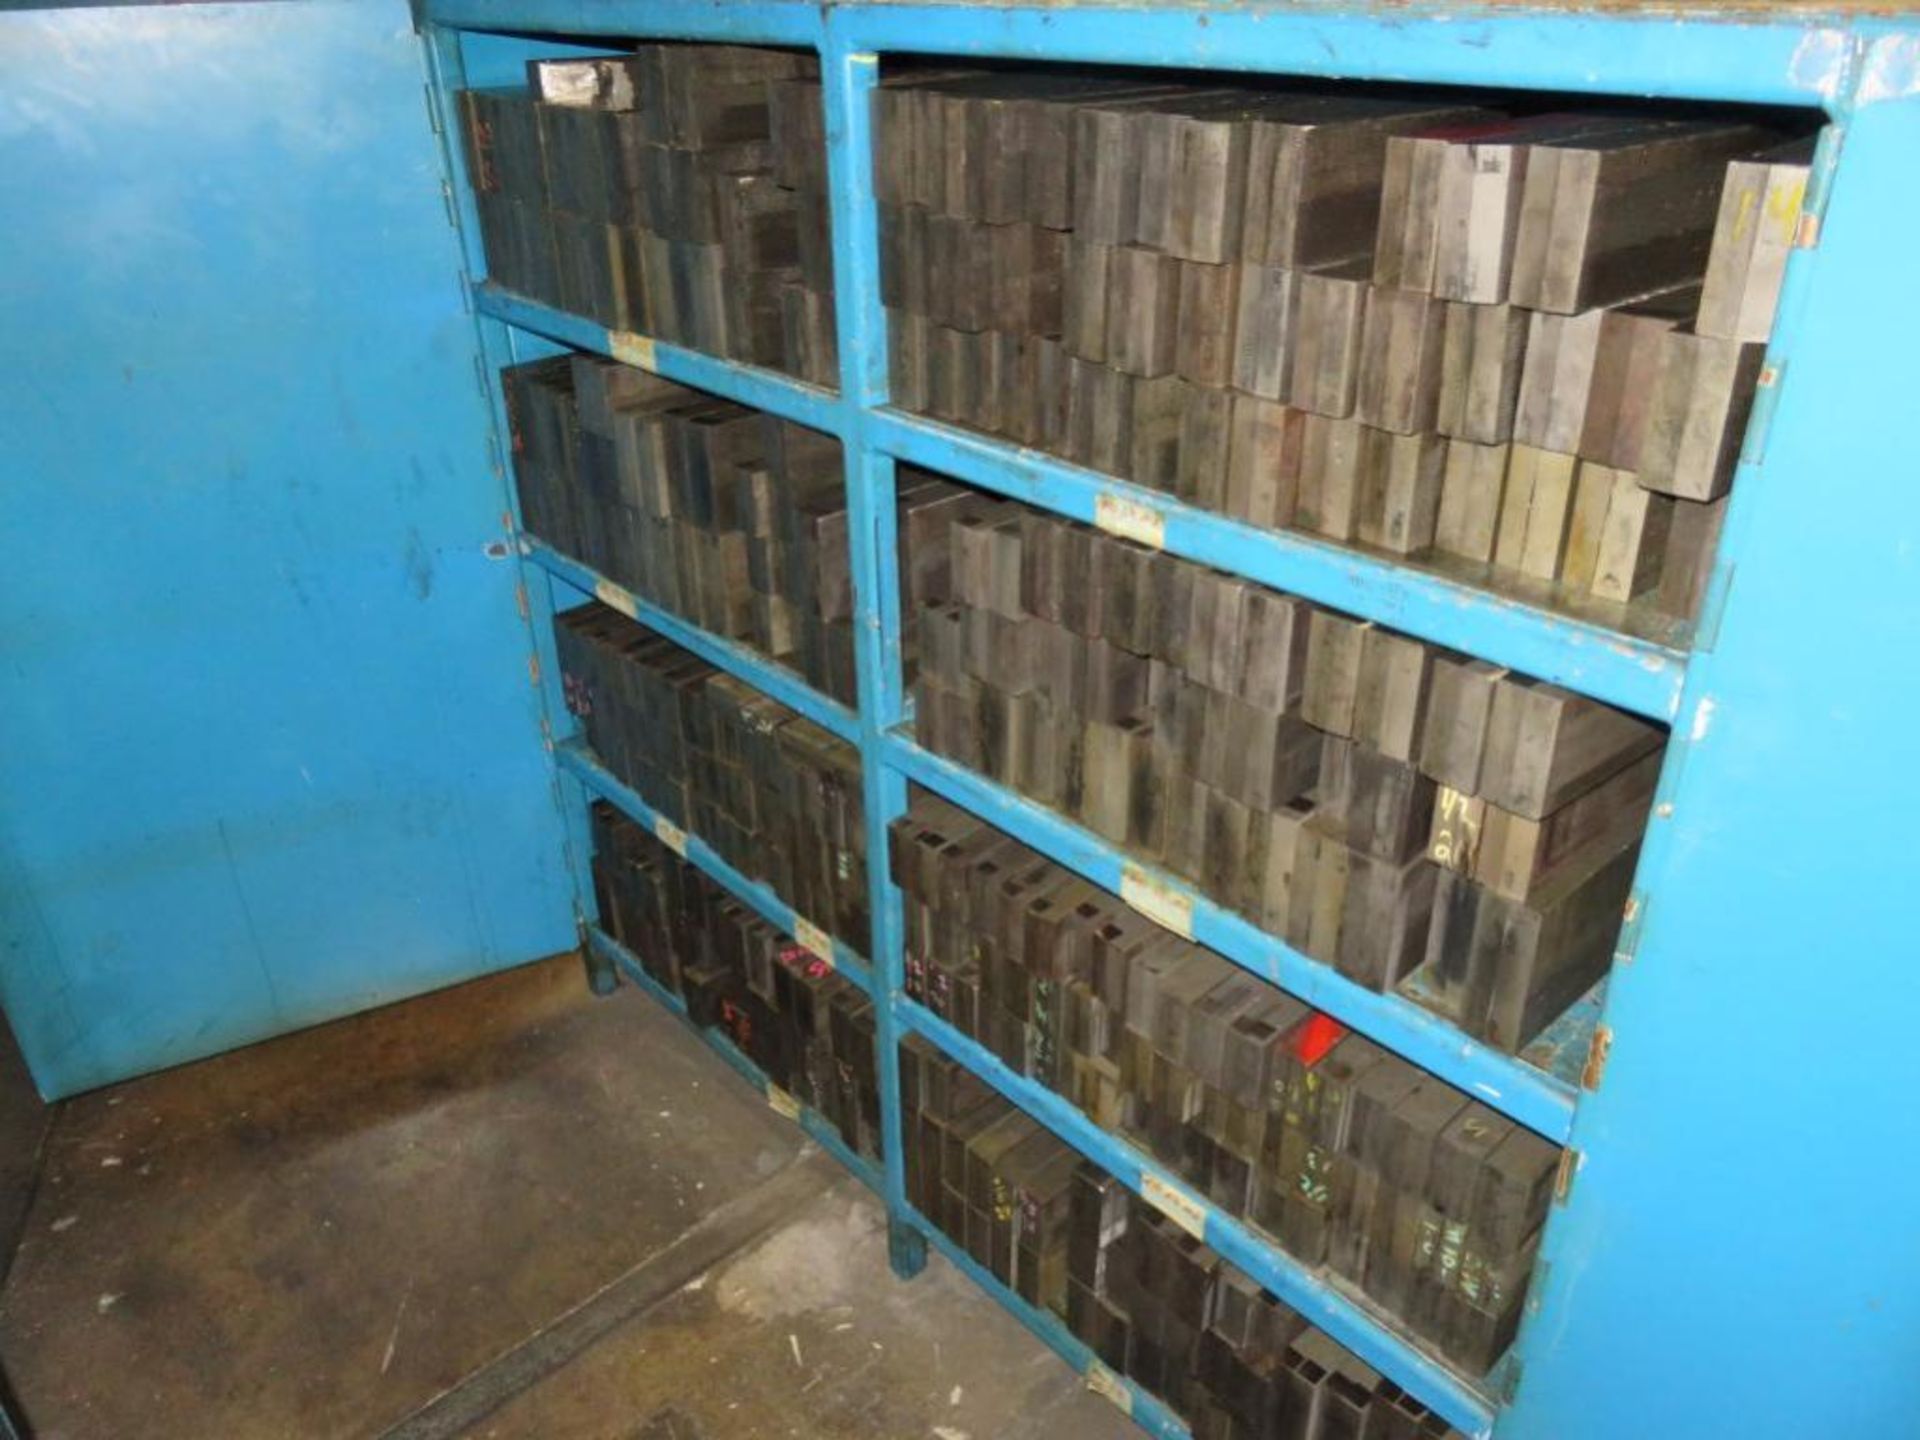 LOT: Assorted New & Used Die Sets in (3) 2-Door Cabinets & (2) Shelves in Central Stores Area (Locat